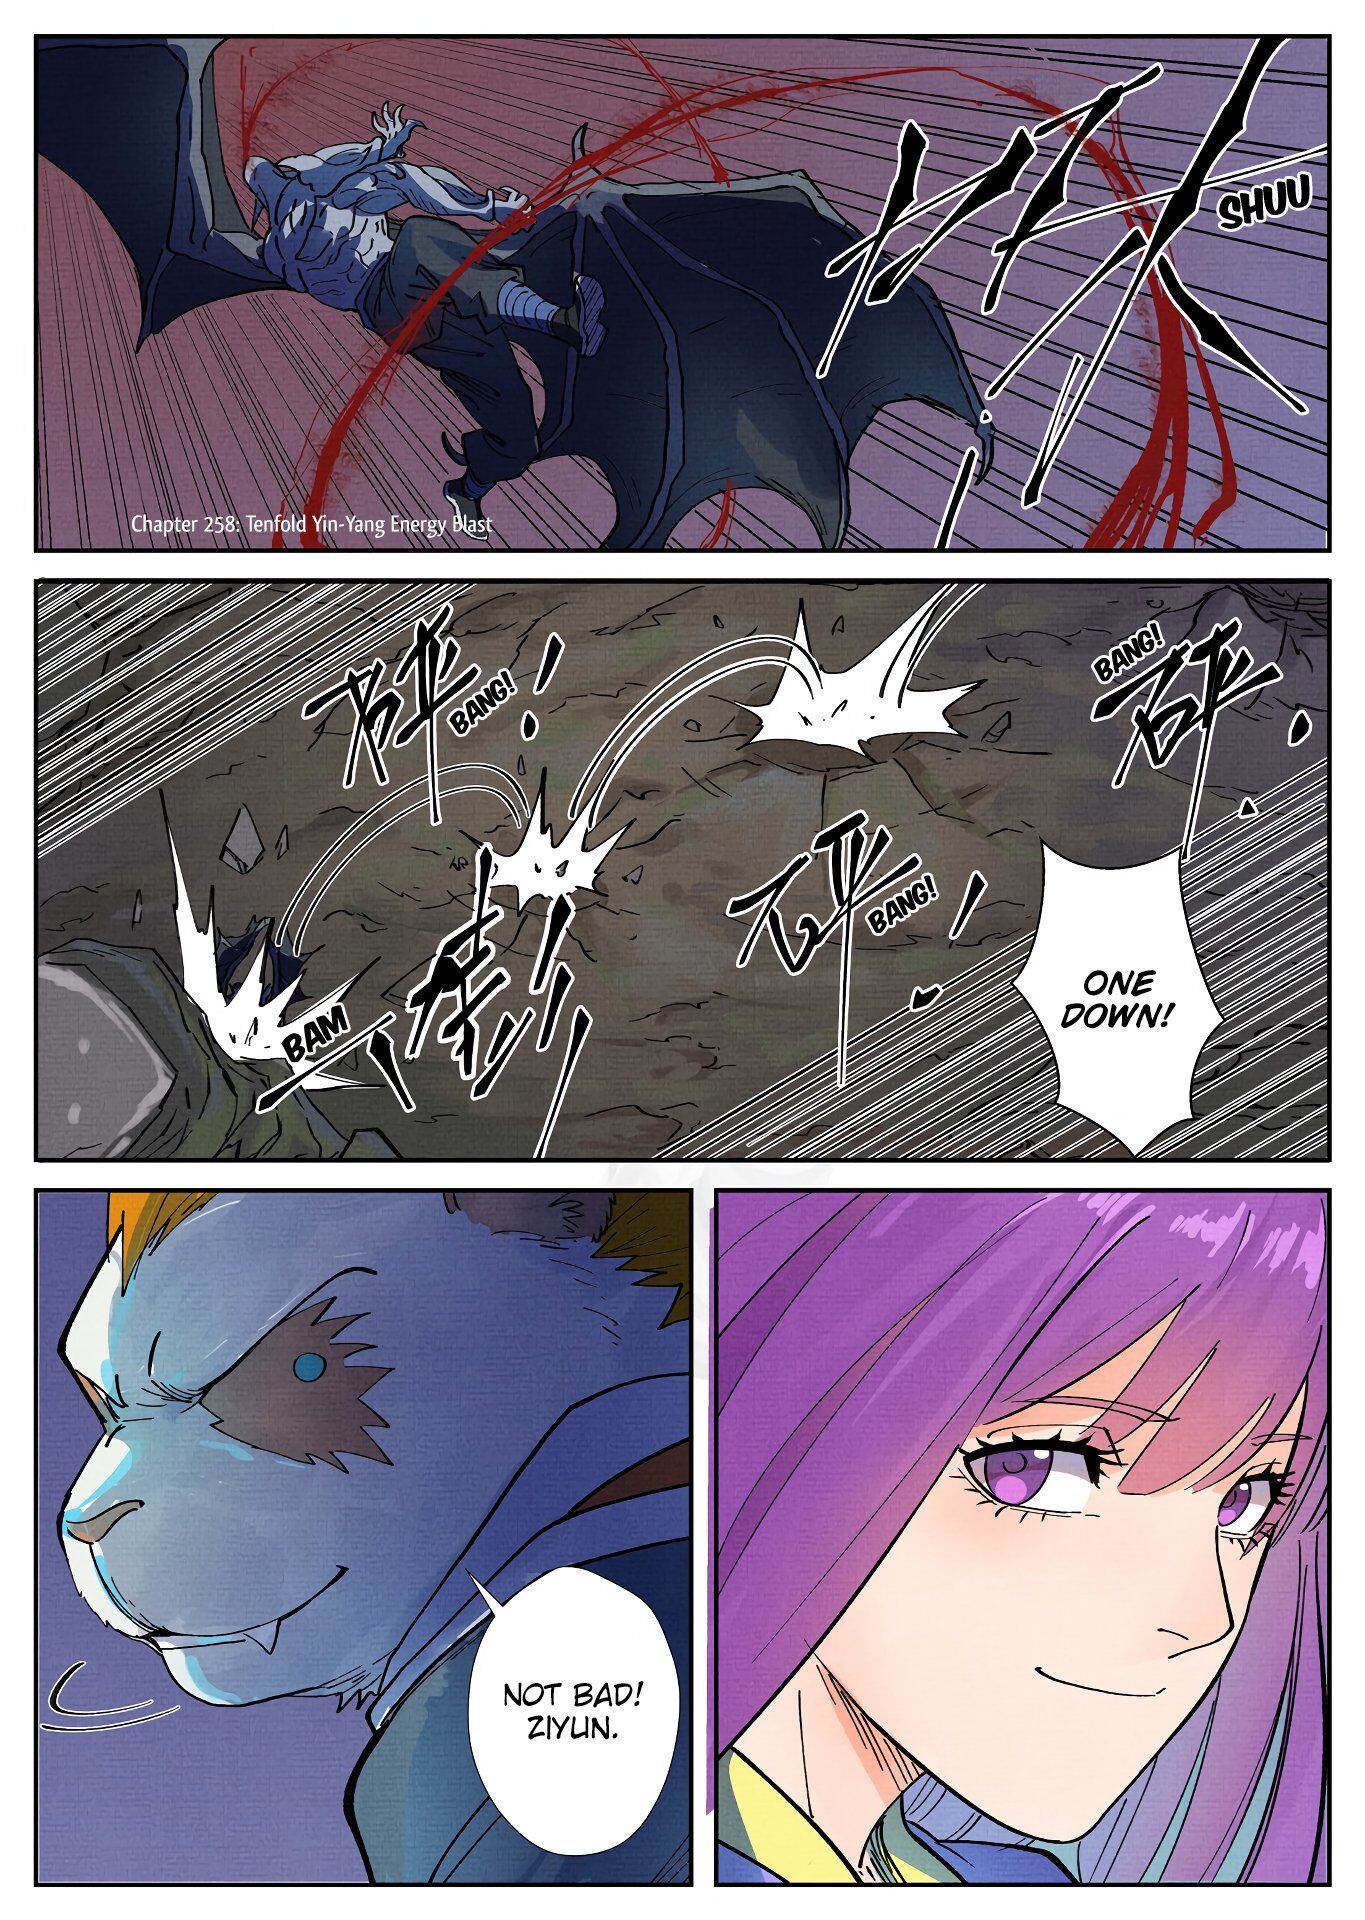 Tales of Demons and Gods Manhua Chapter 258 - Page 1